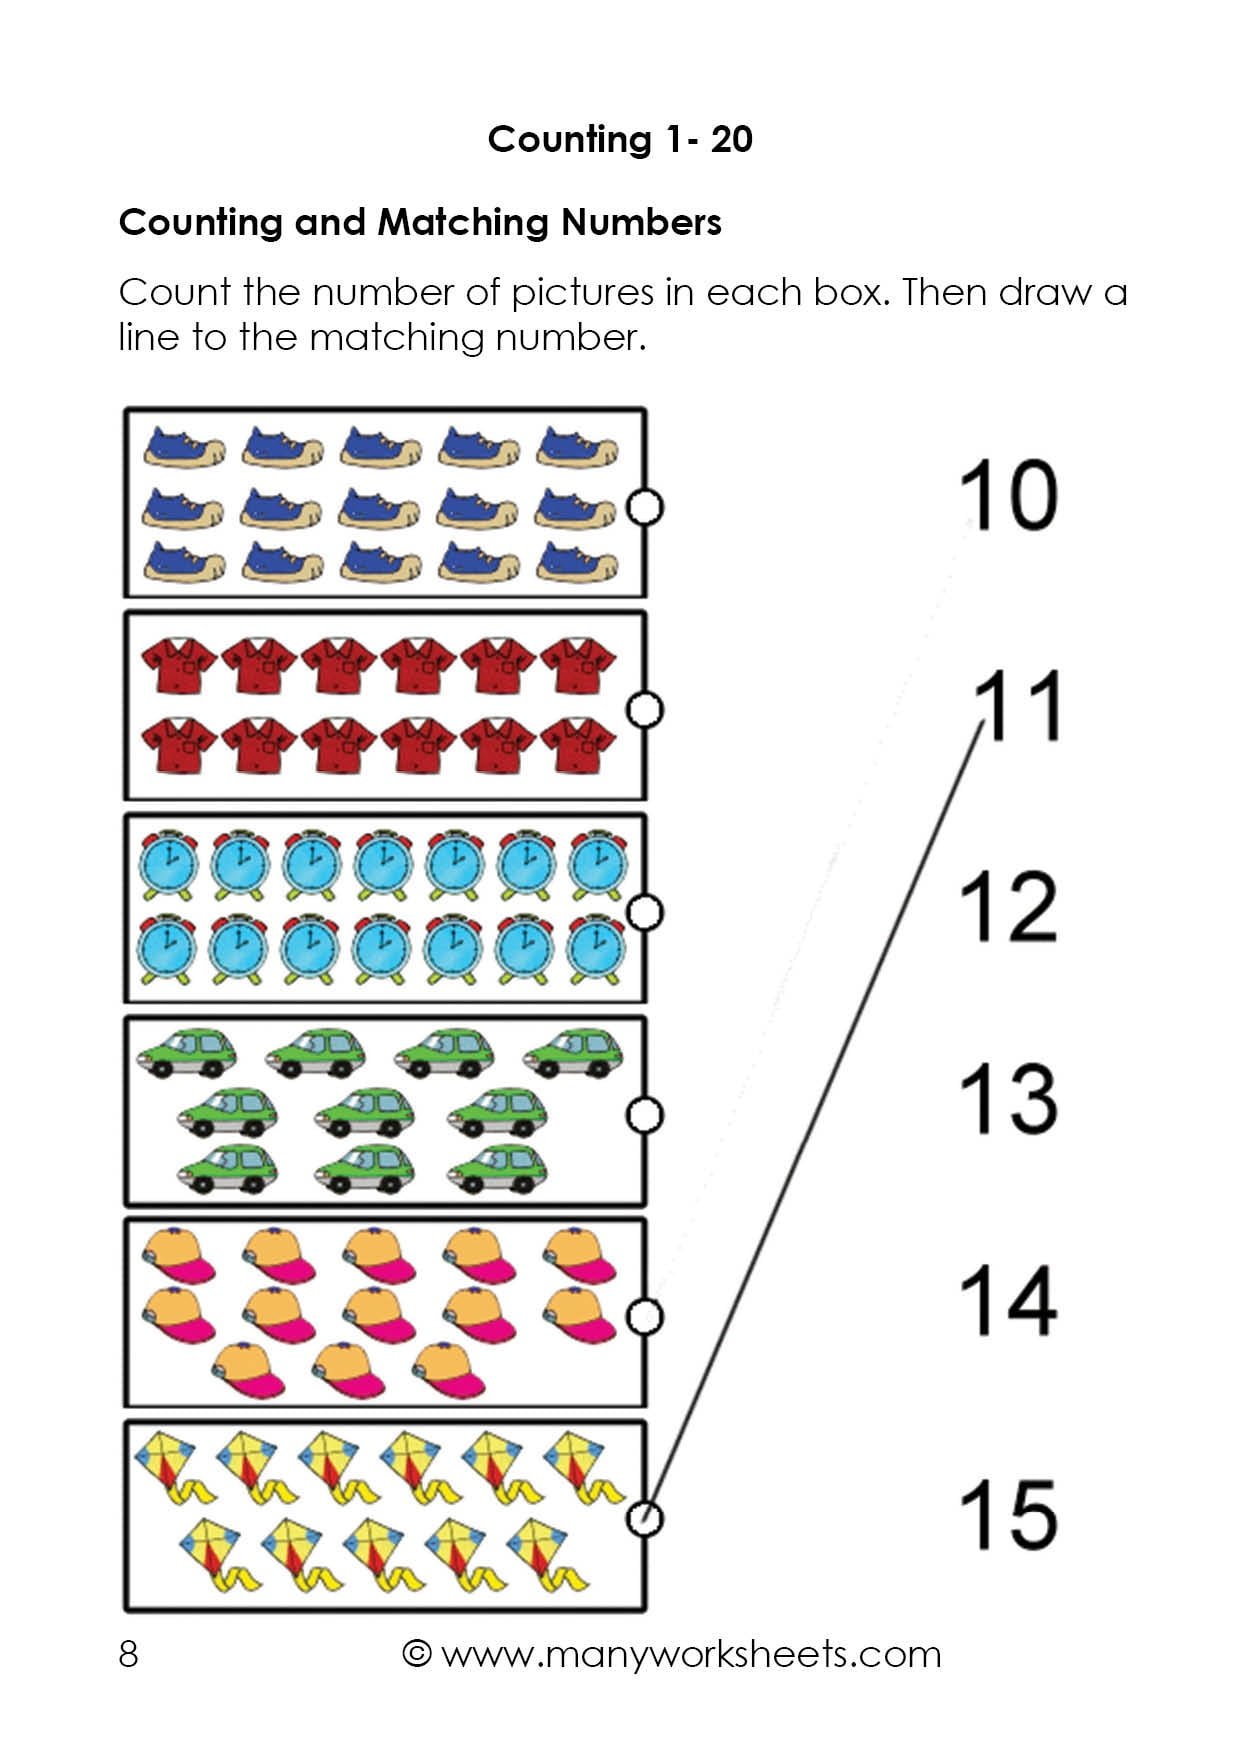 counting-numbers-1-20-worksheets-worksheetscity